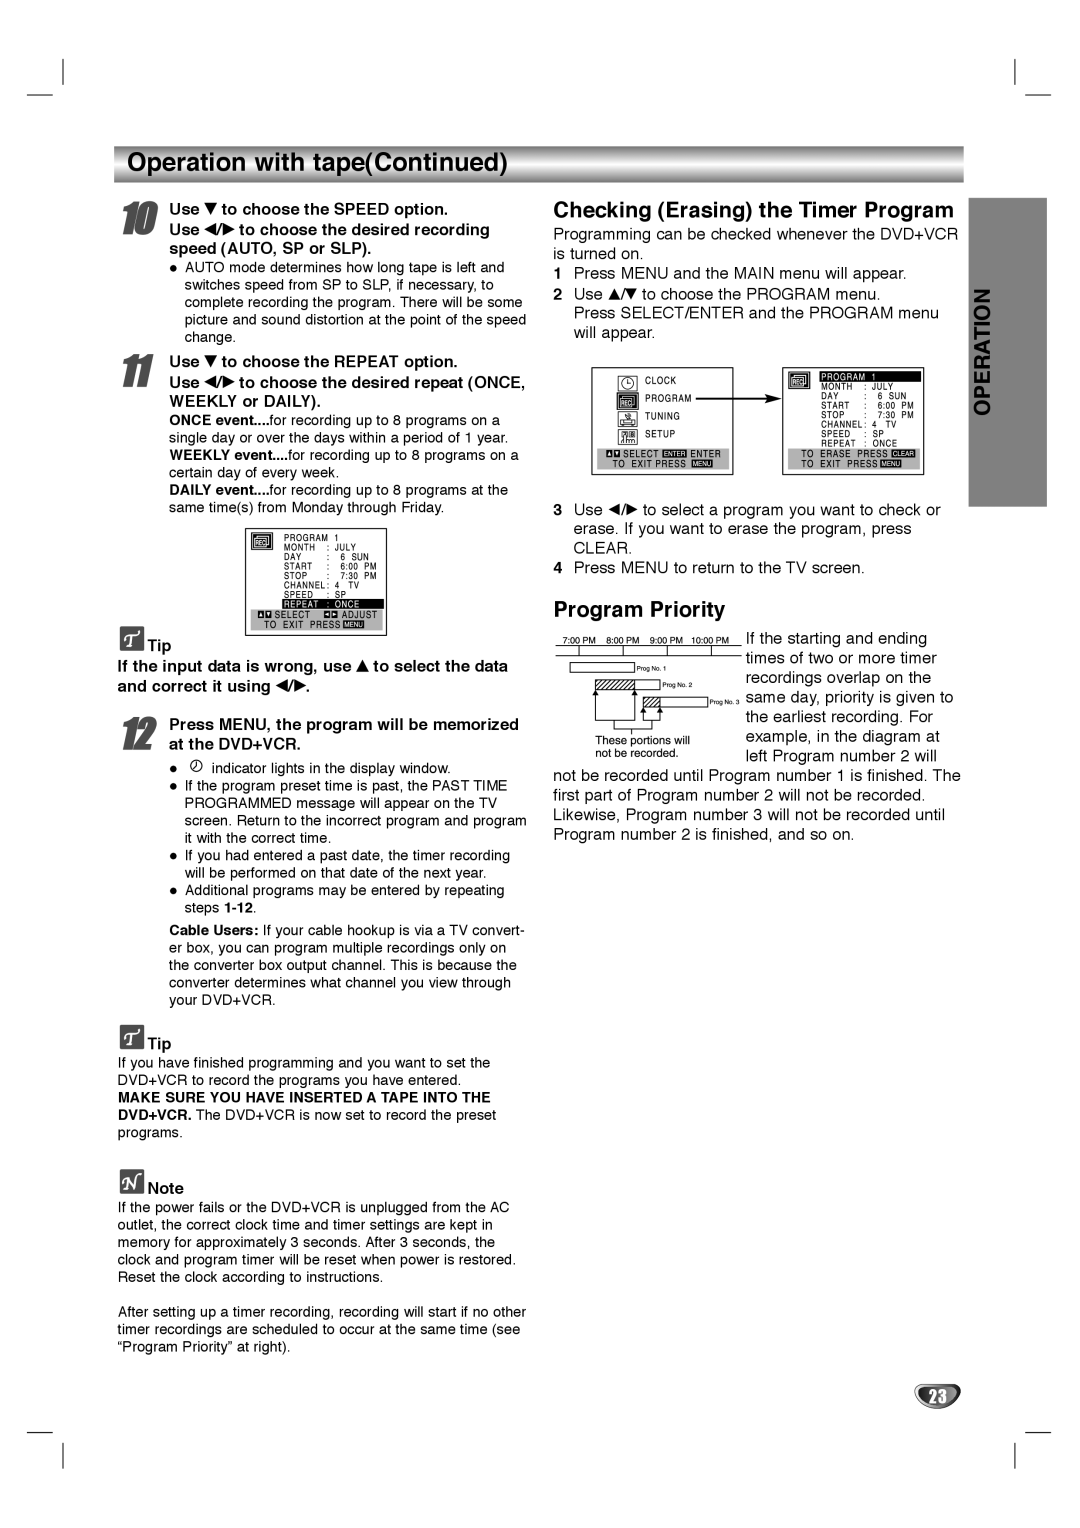 Sanyo SCP-2700 instruction manual Operation with tapeContinued, Checking Erasing the Timer Program, Program Priority 